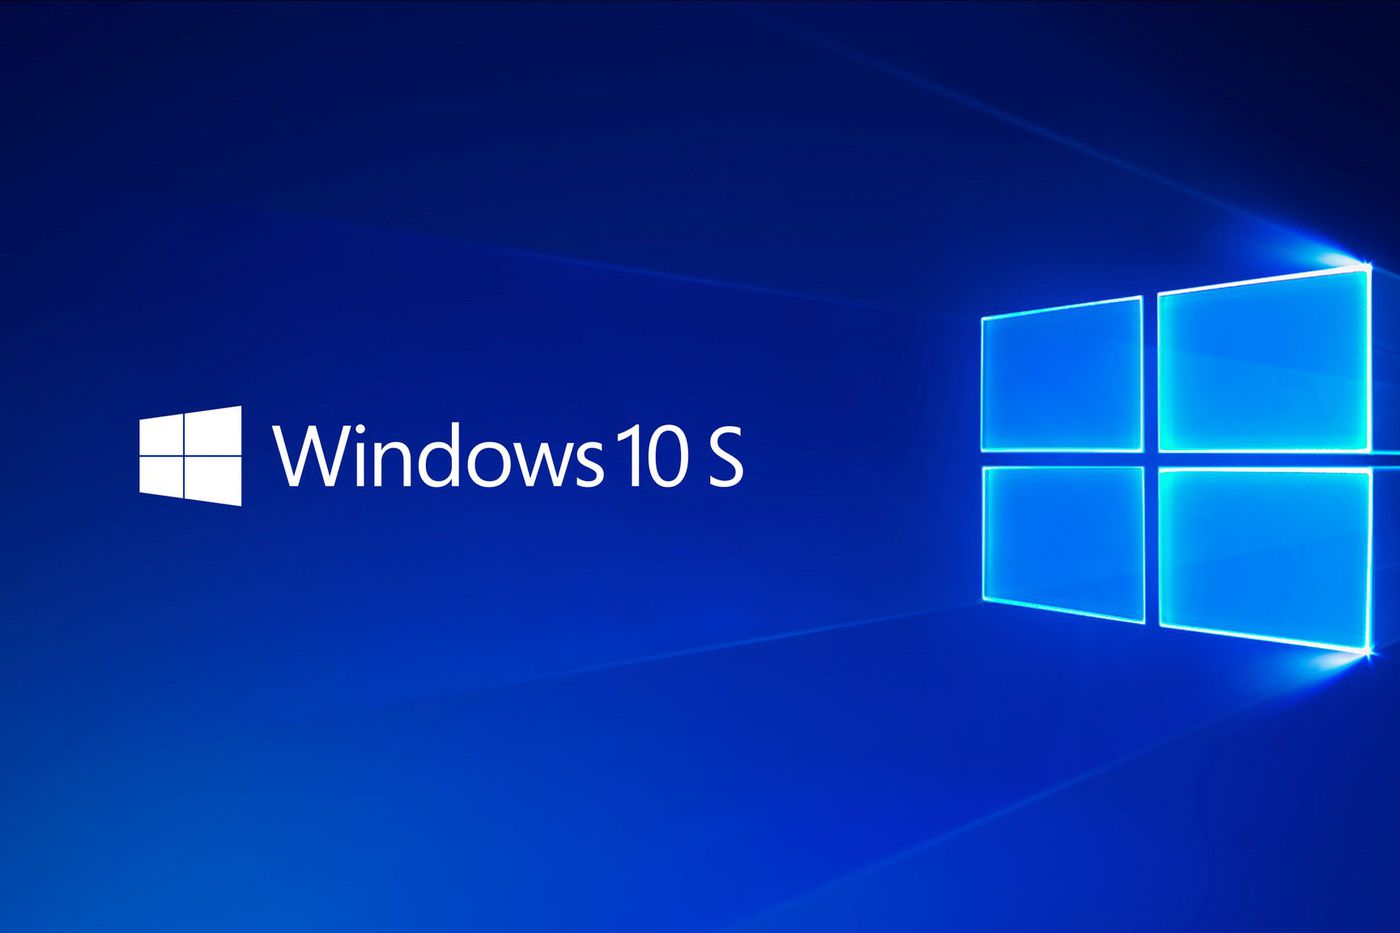 Windows 10 S can be easily downloaded by everyone. What news could be better than that? The operating system, new to the users, is available to be downloaded by anyone and everyone. The new OS is different from the others of the same line and the counterparts in many aspects. It has cutting-edge features and tech that boggles the good competitors out there. Let’s discuss Windows 10S in length today: How Is Windows 10 S Different? Windows 10 S is different than the other operating systems, being one of the latest versions, in how it runs applications. This OS can only run applications that are directly downloaded from the Windows store. No applications other than the mentioned are supported or can be run by it. This is why it is also dubbed as the software perfect for an education setting. As a matter of fact, Windows 10 S is the educational software and is being widely used in institutes around the world. The liberty that you get in terms of the restriction to only download the apps from the official store allows the certain kind of barriers to be placed in terms of which app to use. Which Devices Are Eligible For Windows 10 S? Initially, Microsoft only launched a Surface Laptop and made the Windows available for the MSDN subscribers. But, once the restriction was lifted off, the mass-download was made possible. However, Windows 10 Home users aren’t allowed to download 10 S. The user should be running Windows 10 Education, Windows 10 Pro, Windows 10 Pro Education, or Enterprise to get the benefit out of this OS. Microsoft stated in a press release that the reason behind this thinking was to allow those in the education sector to ensure they have everything needed to be compatible with the Windows 10 S. On the other hand, if the mentioned eligibility criteria are met, the installation will work for everyone. How To Download 10 S? If you or your institute wants to switch to 10 S for educational purposes, it isn’t exactly hard to download. To learn how to download and install Windows 10 S from the official Microsoft portal, you can simply go to the website here to switch to this OS from your last one. 